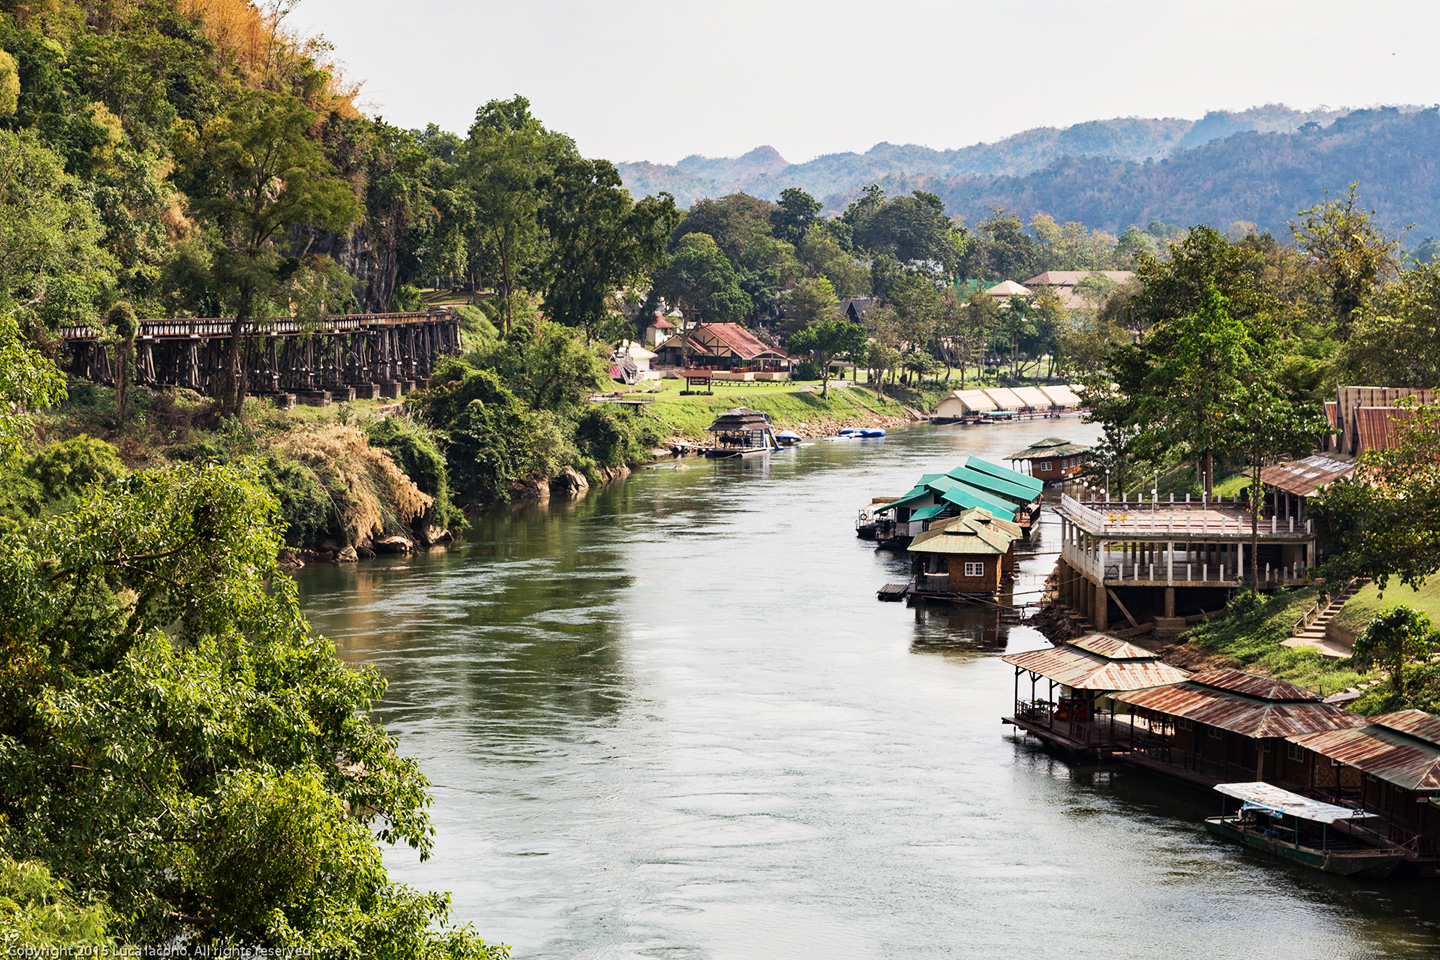  A few yards from the Tham Krasae Railway Station is this breathtaking viewpoint, overlooking a peaceful bend of the Khwae Noi River, perfect for a lunch break. The view was one of the highlights of the day, even in the most unforgiving midday light.